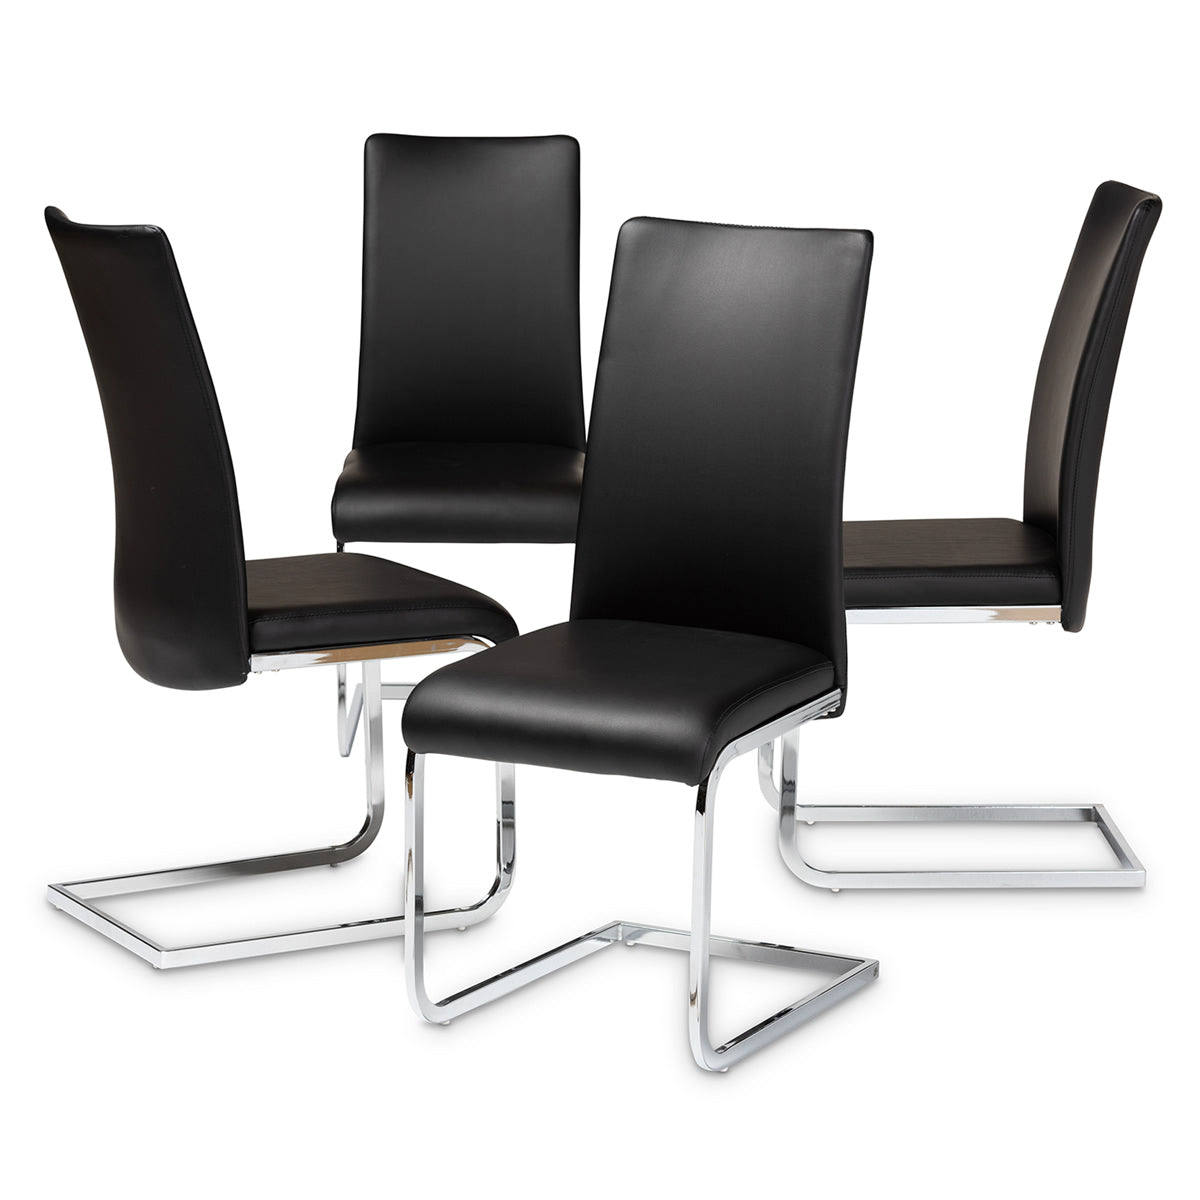 Baxton Studio Cyprien Modern and Contemporary Black Faux Leather Upholstered Dining Chair (Set of 4) Baxton Studio-dining chair-Minimal And Modern - 1